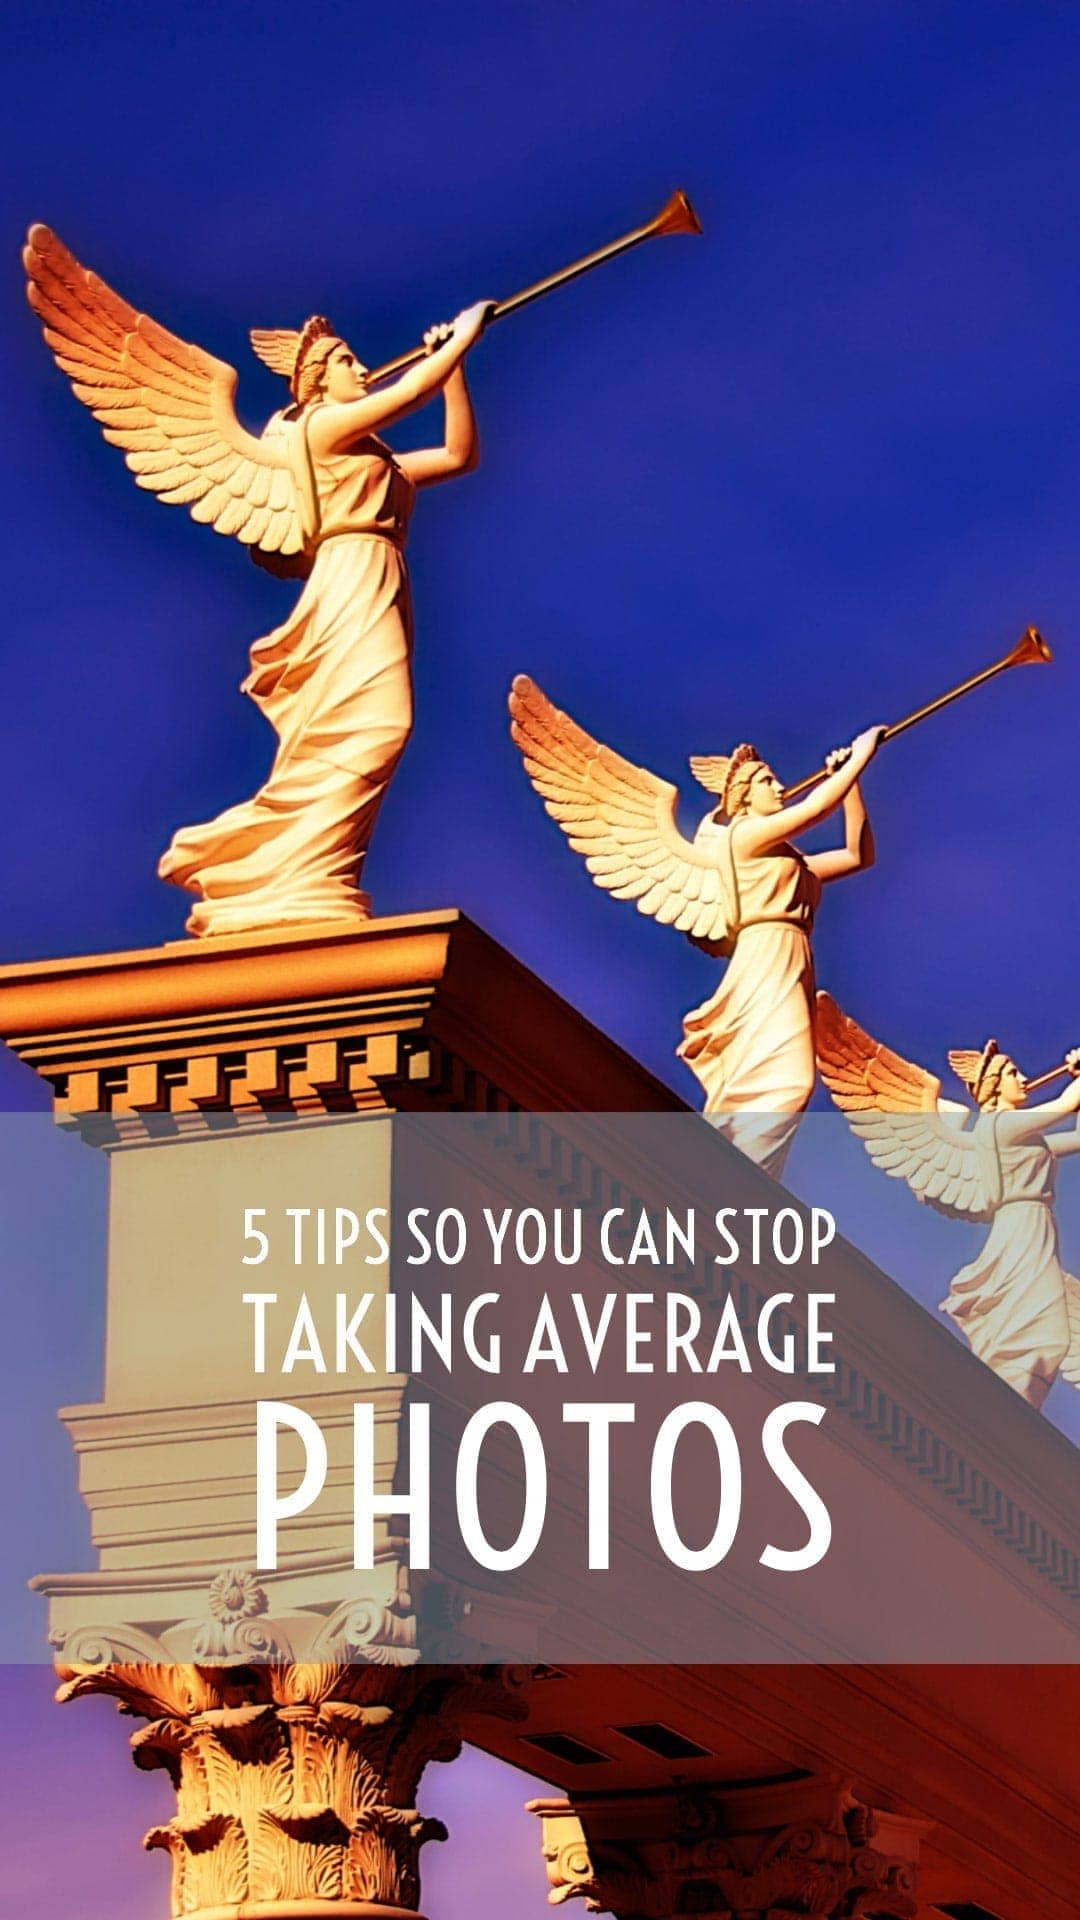 5 Tips So You Can Stop Taking Average Photos